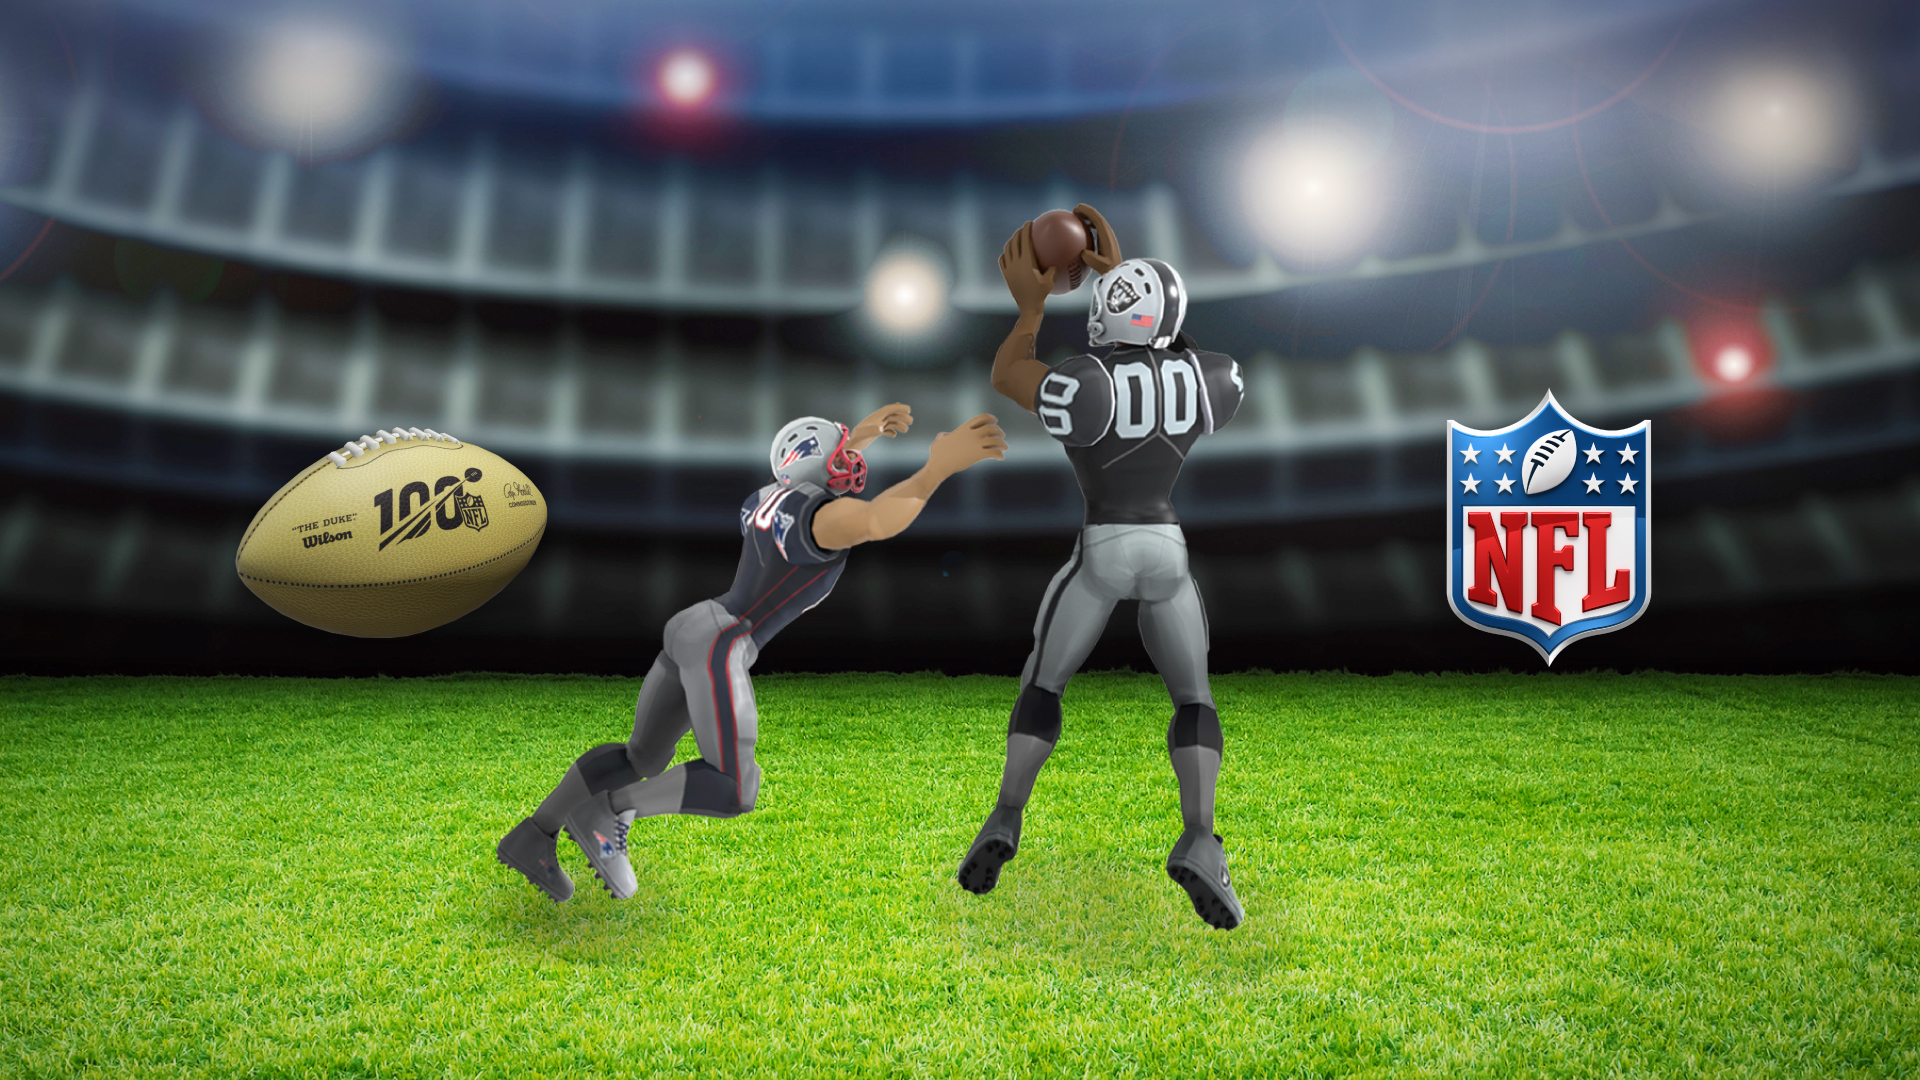 Roblox Teams Up With The Nfl For The 2019 Season Roblox Blog